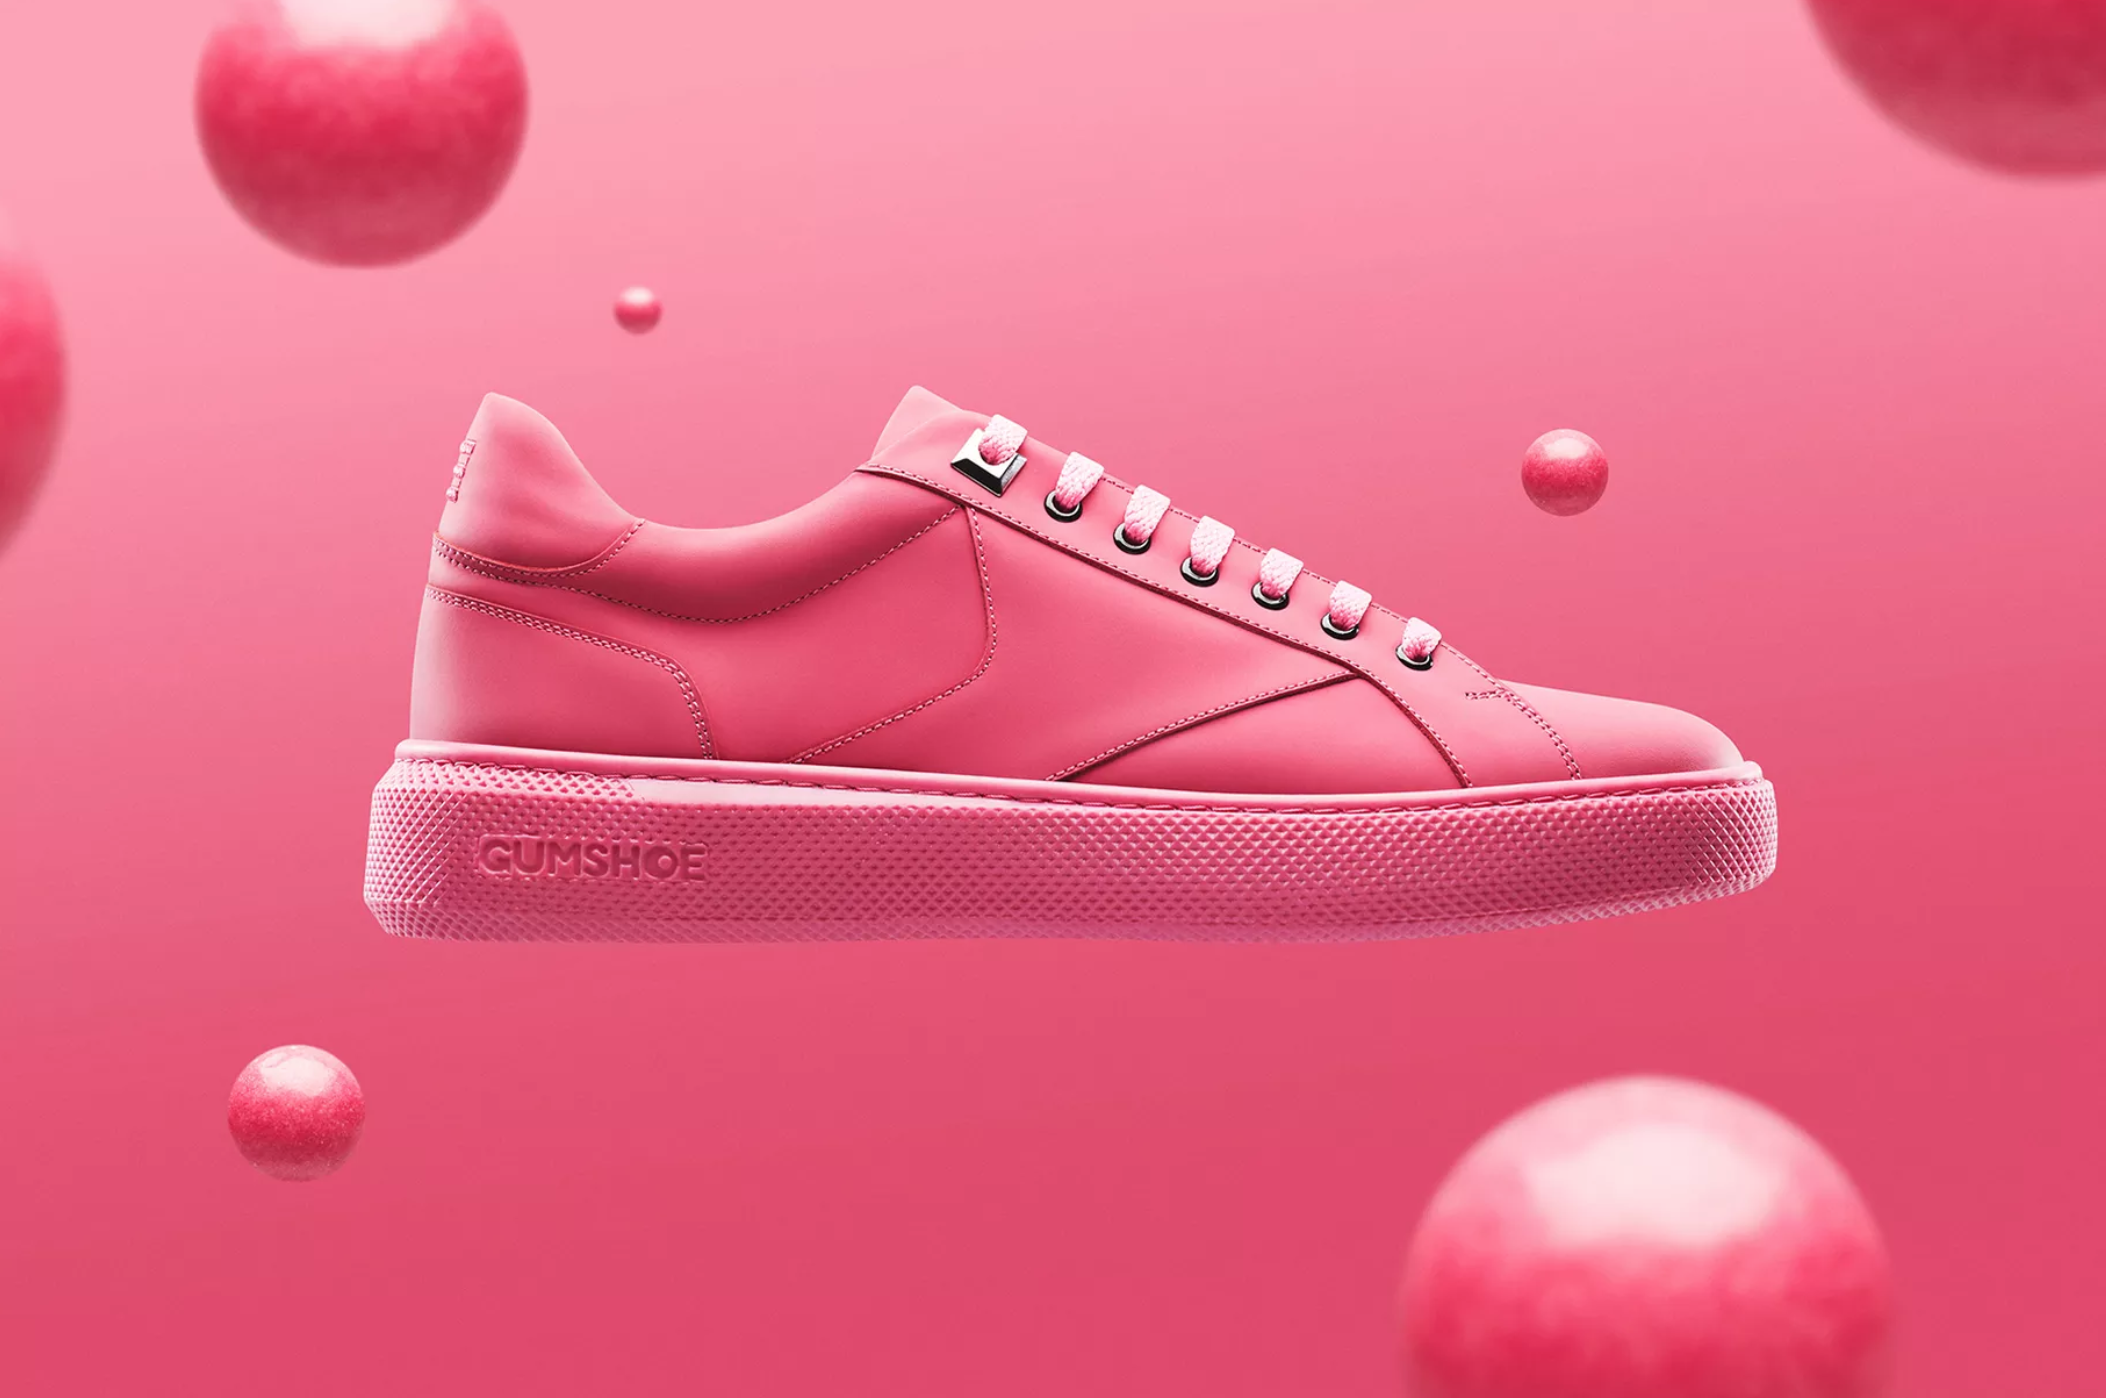 LOOK: Bubblegum-colored sneakers made from actual gum - NOLISOLI